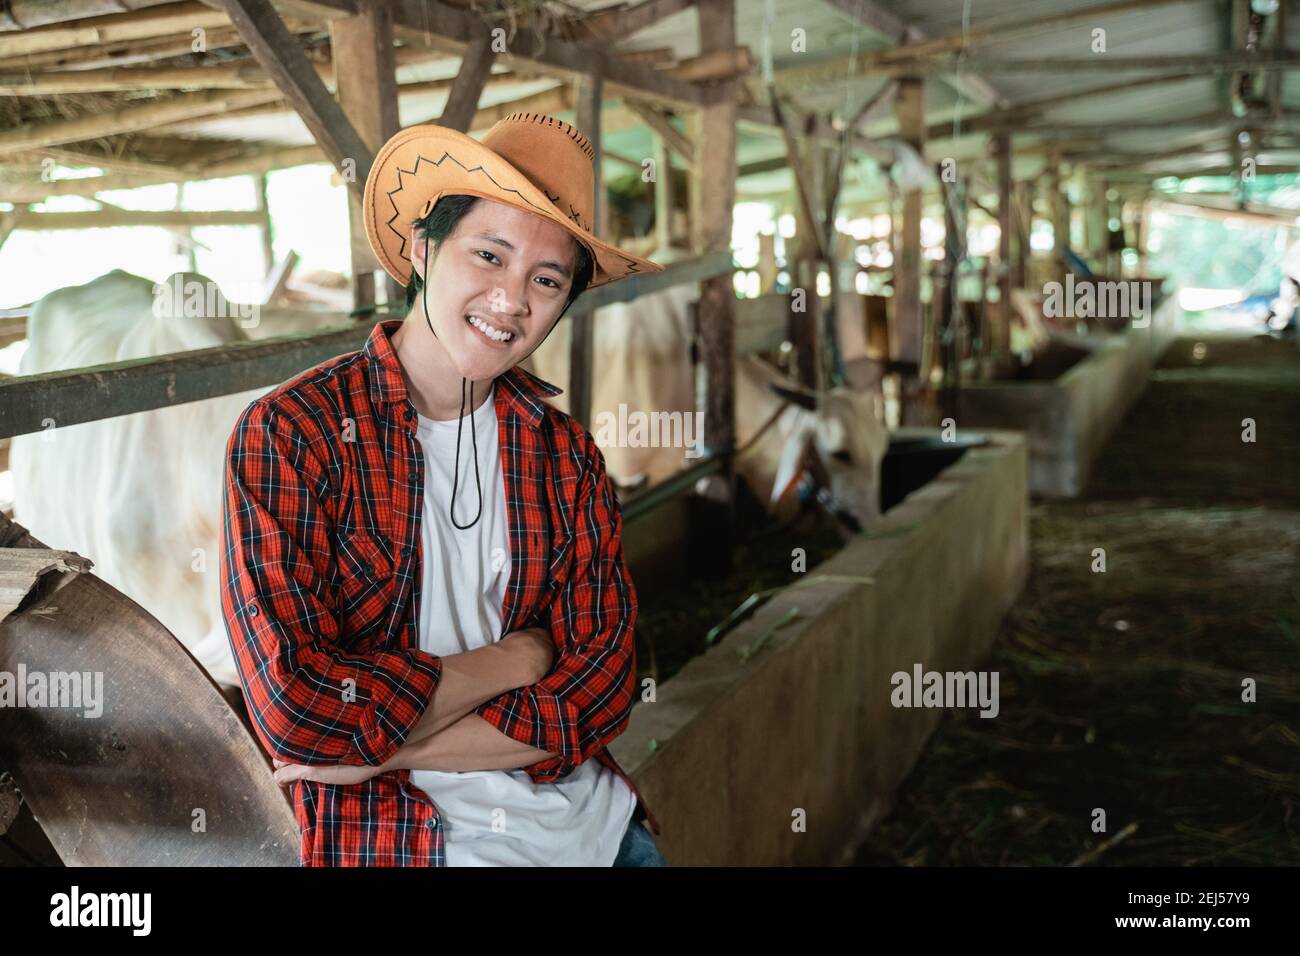 https://c8.alamy.com/comp/2EJ57Y9/handsome-rancher-wearing-a-cowboy-hat-with-crossed-hands-pose-in-the-background-of-a-cow-farm-stable-2EJ57Y9.jpg